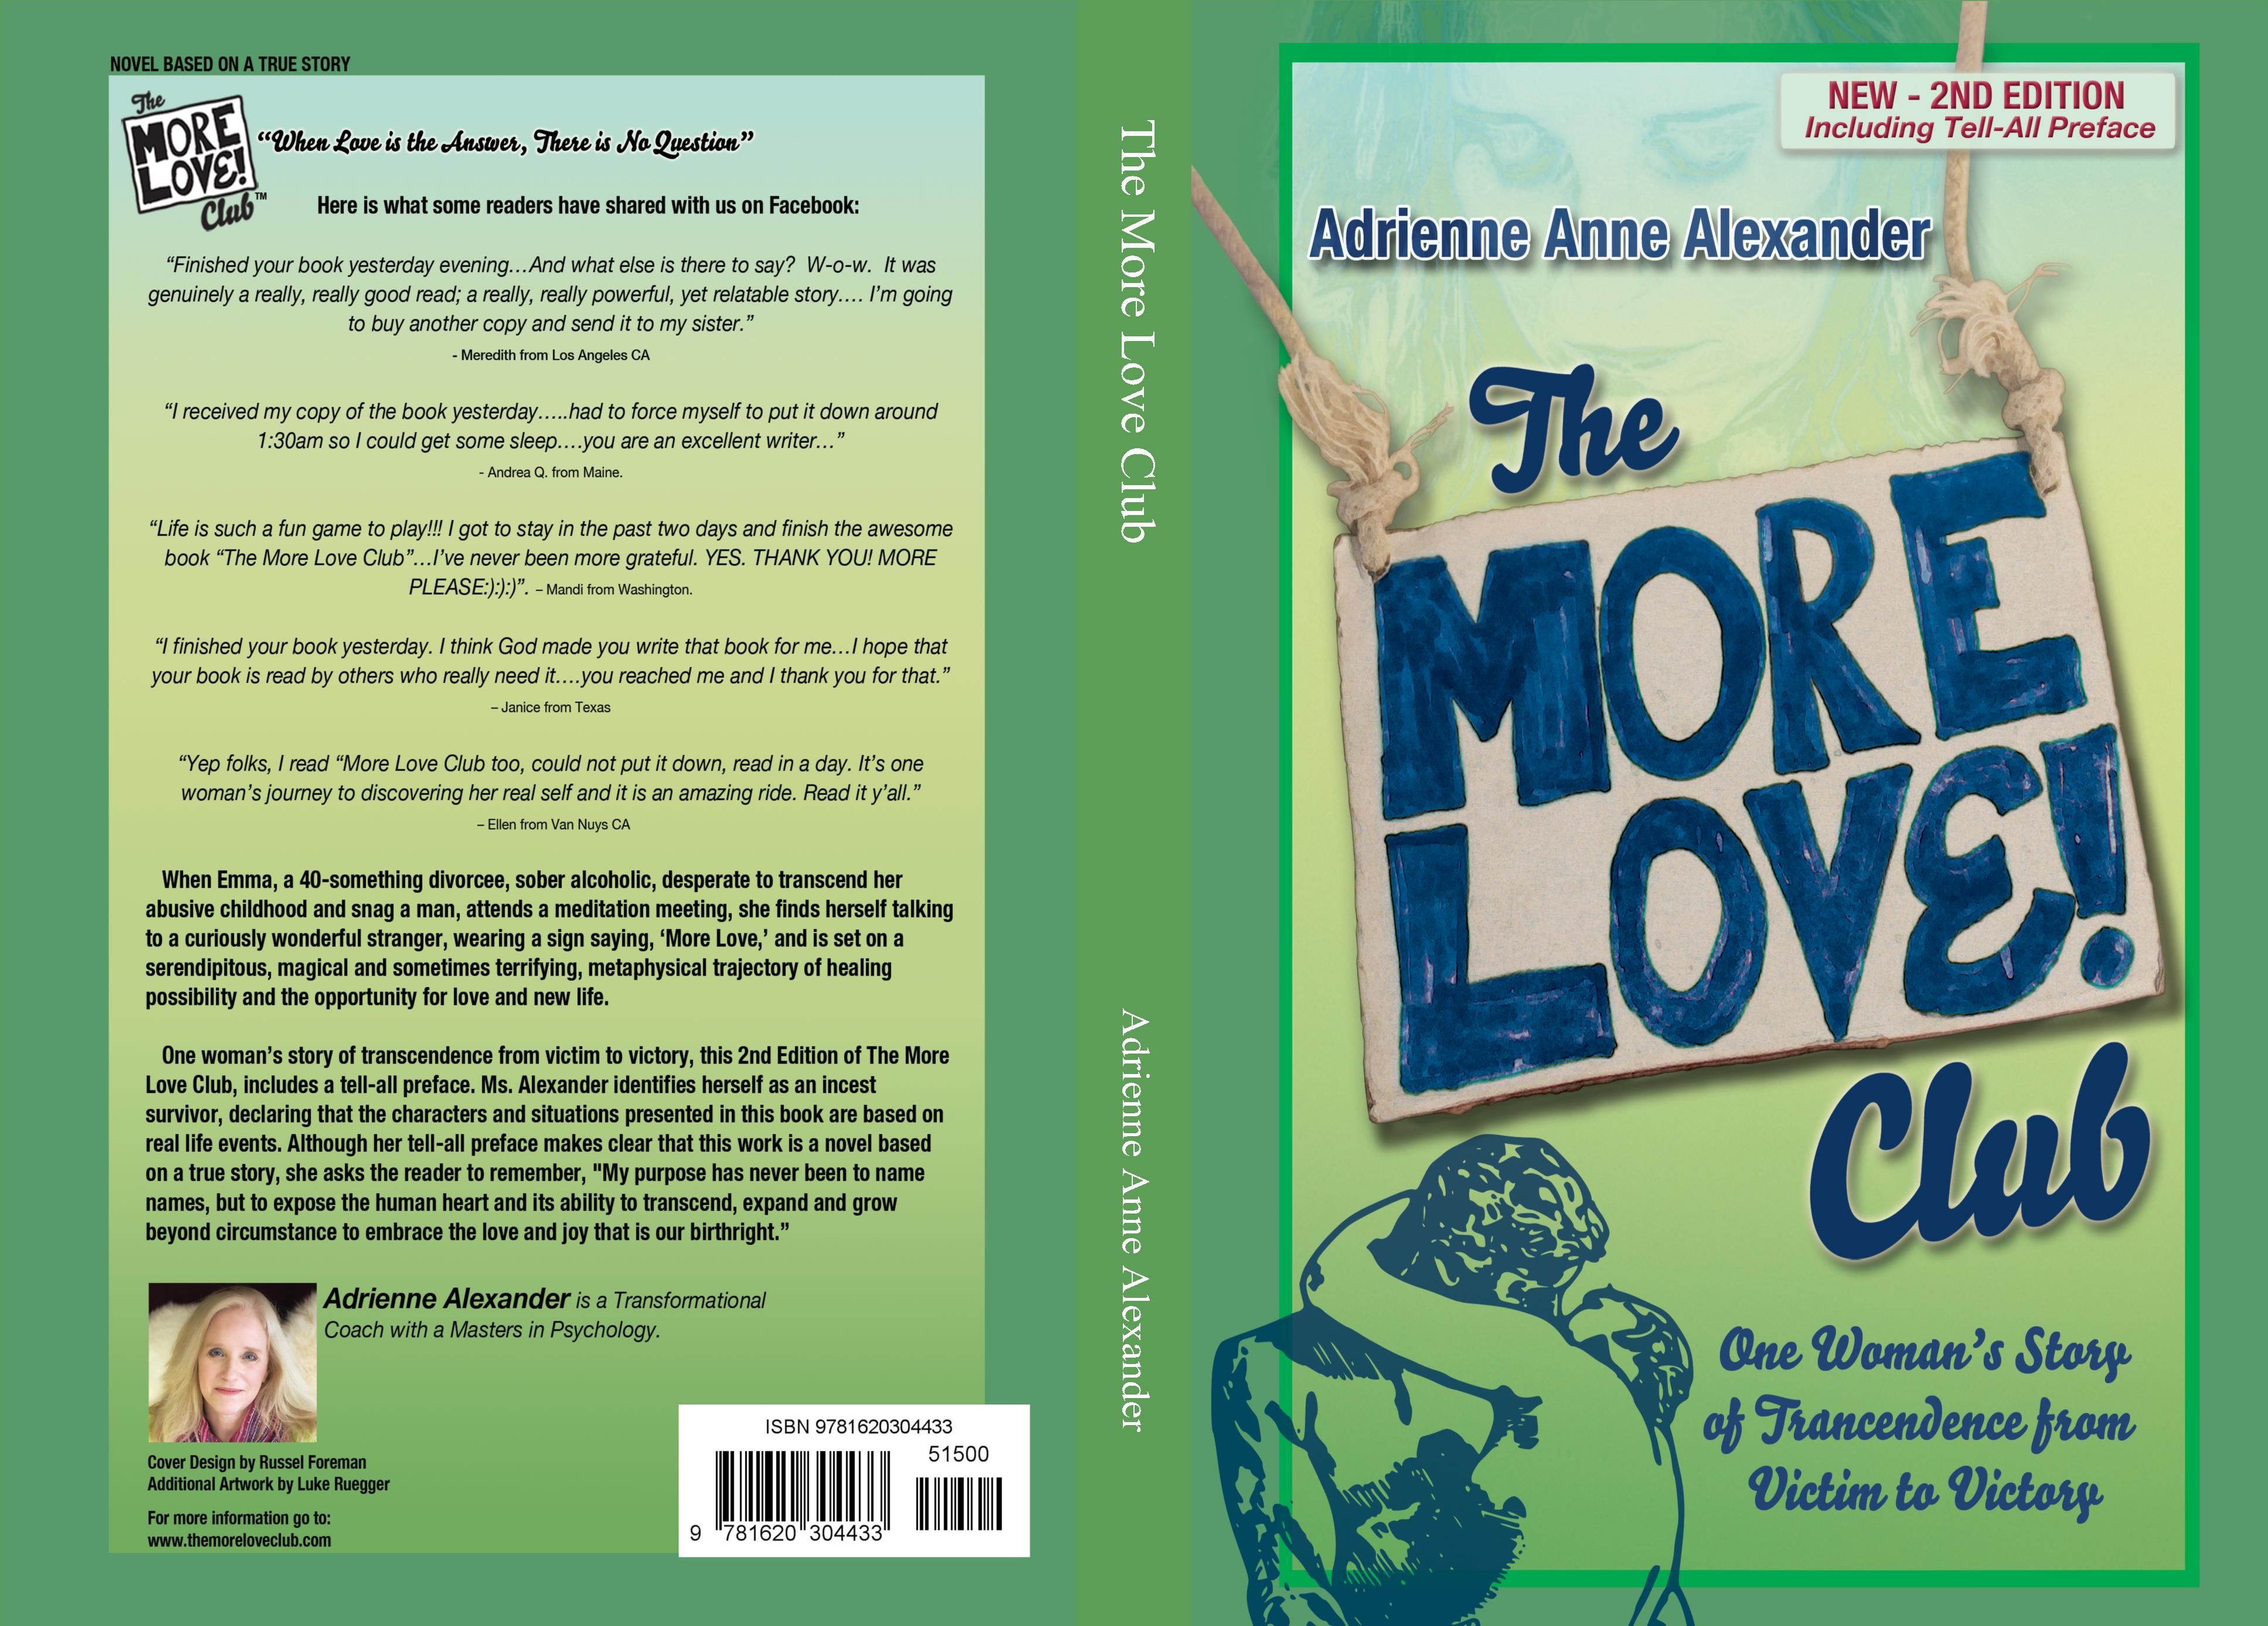 The More Love Club cover image